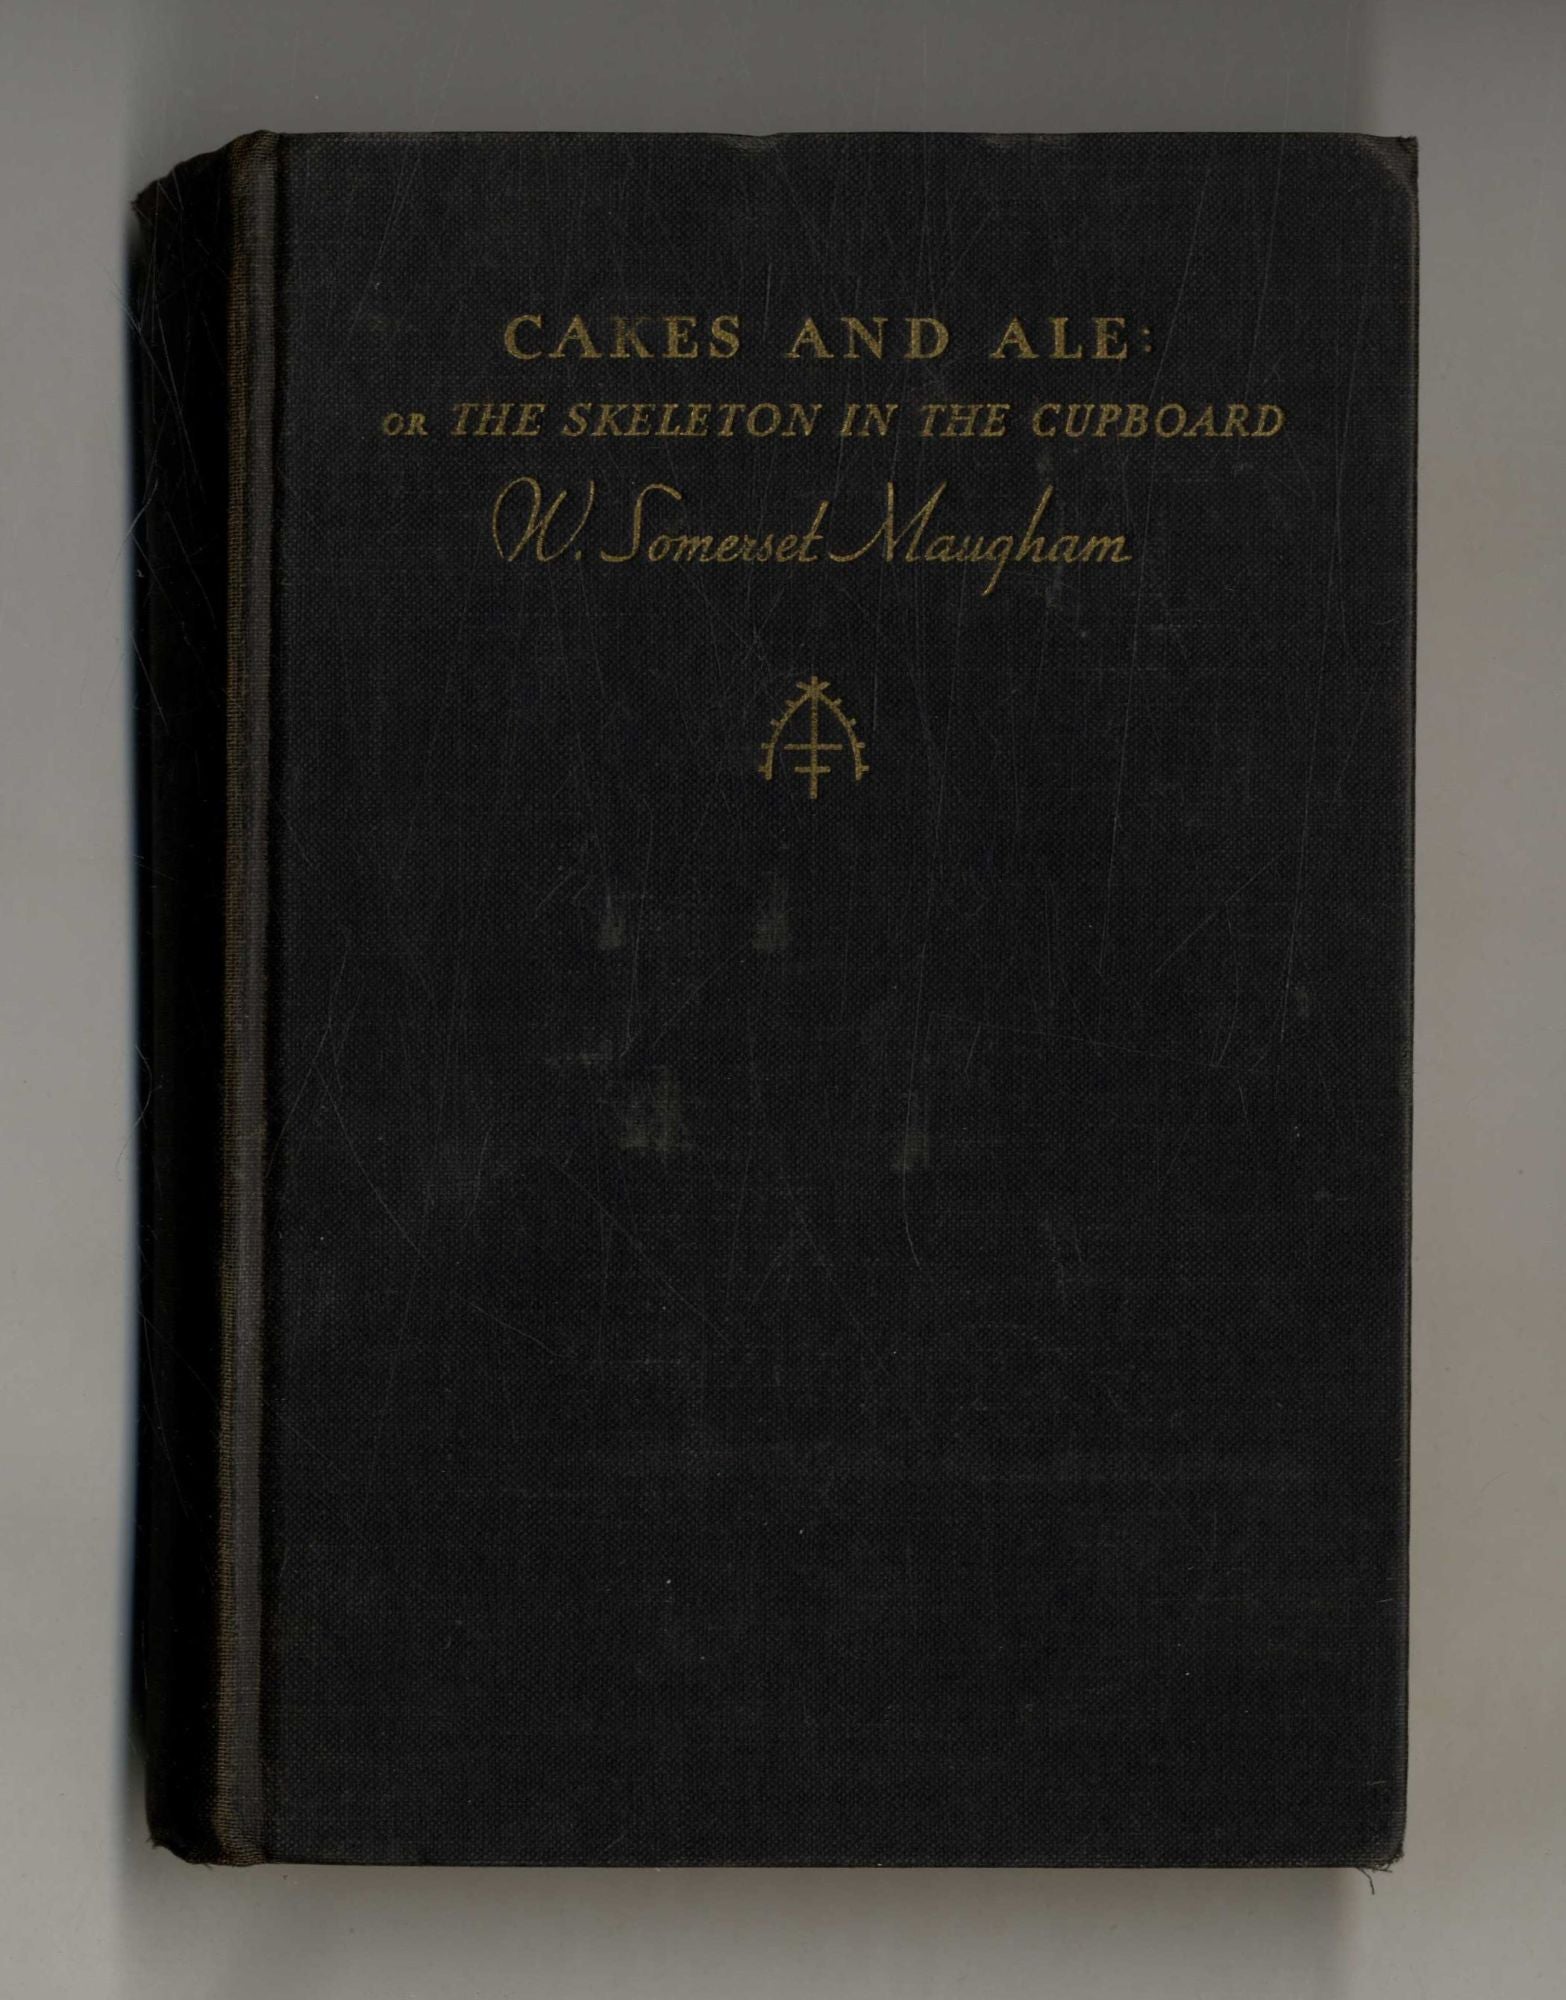 maugham - cakes and ale - First Edition - AbeBooks